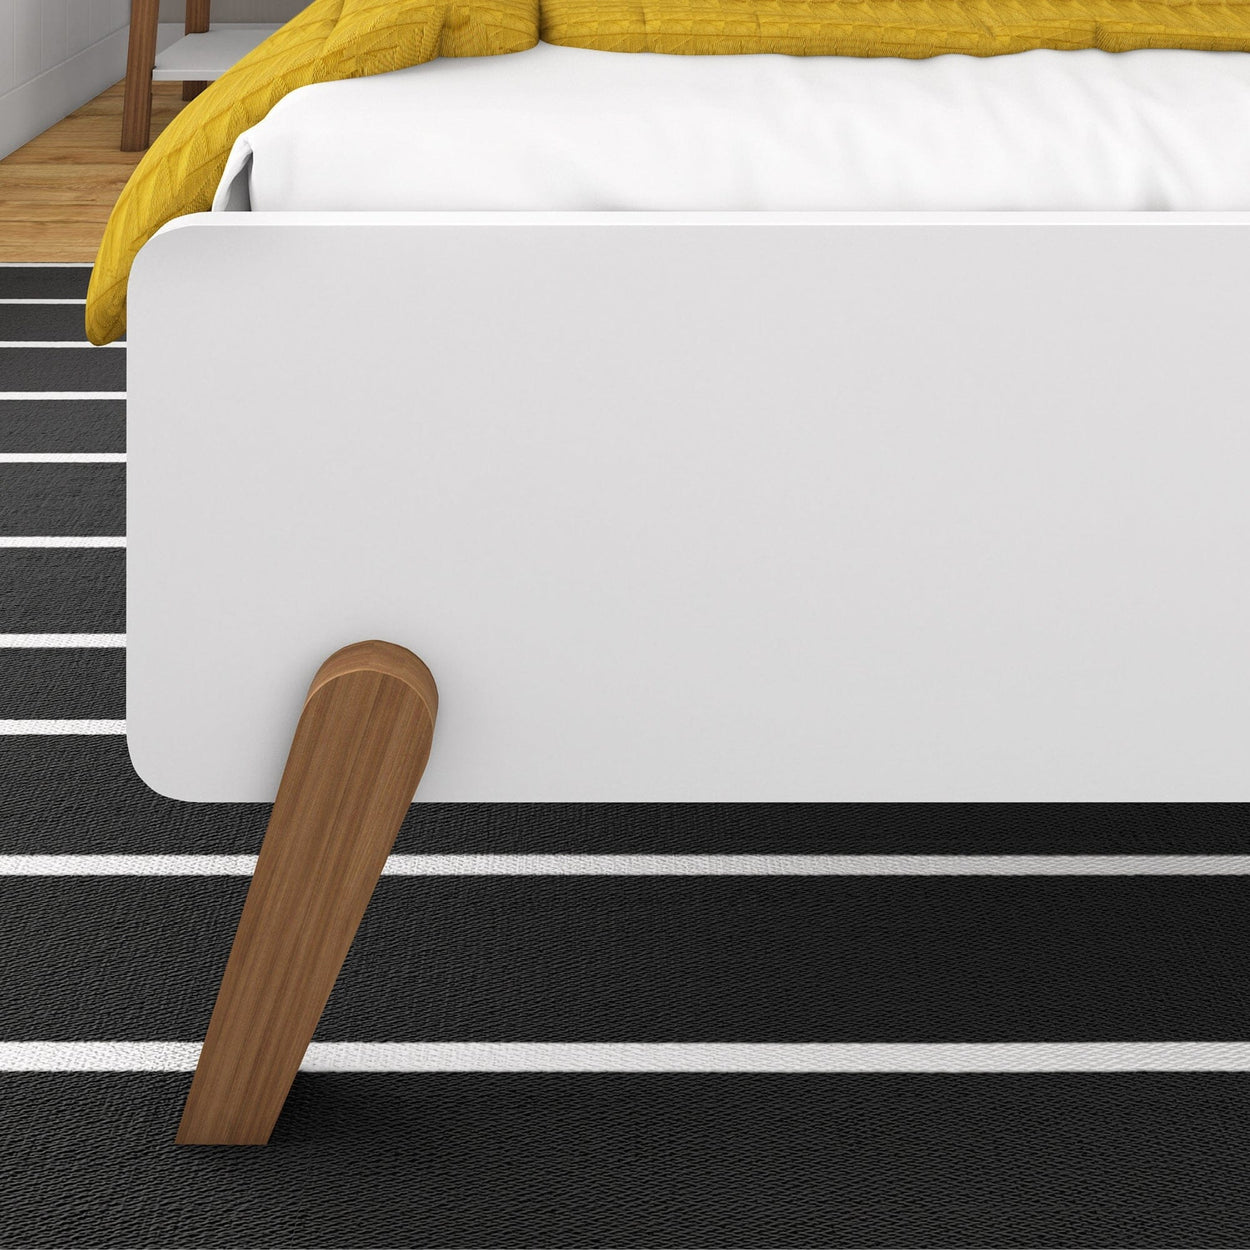 200310-527 : Kids Beds Mid-Century Modern Twin-Size Panel Bed, White/Pecan